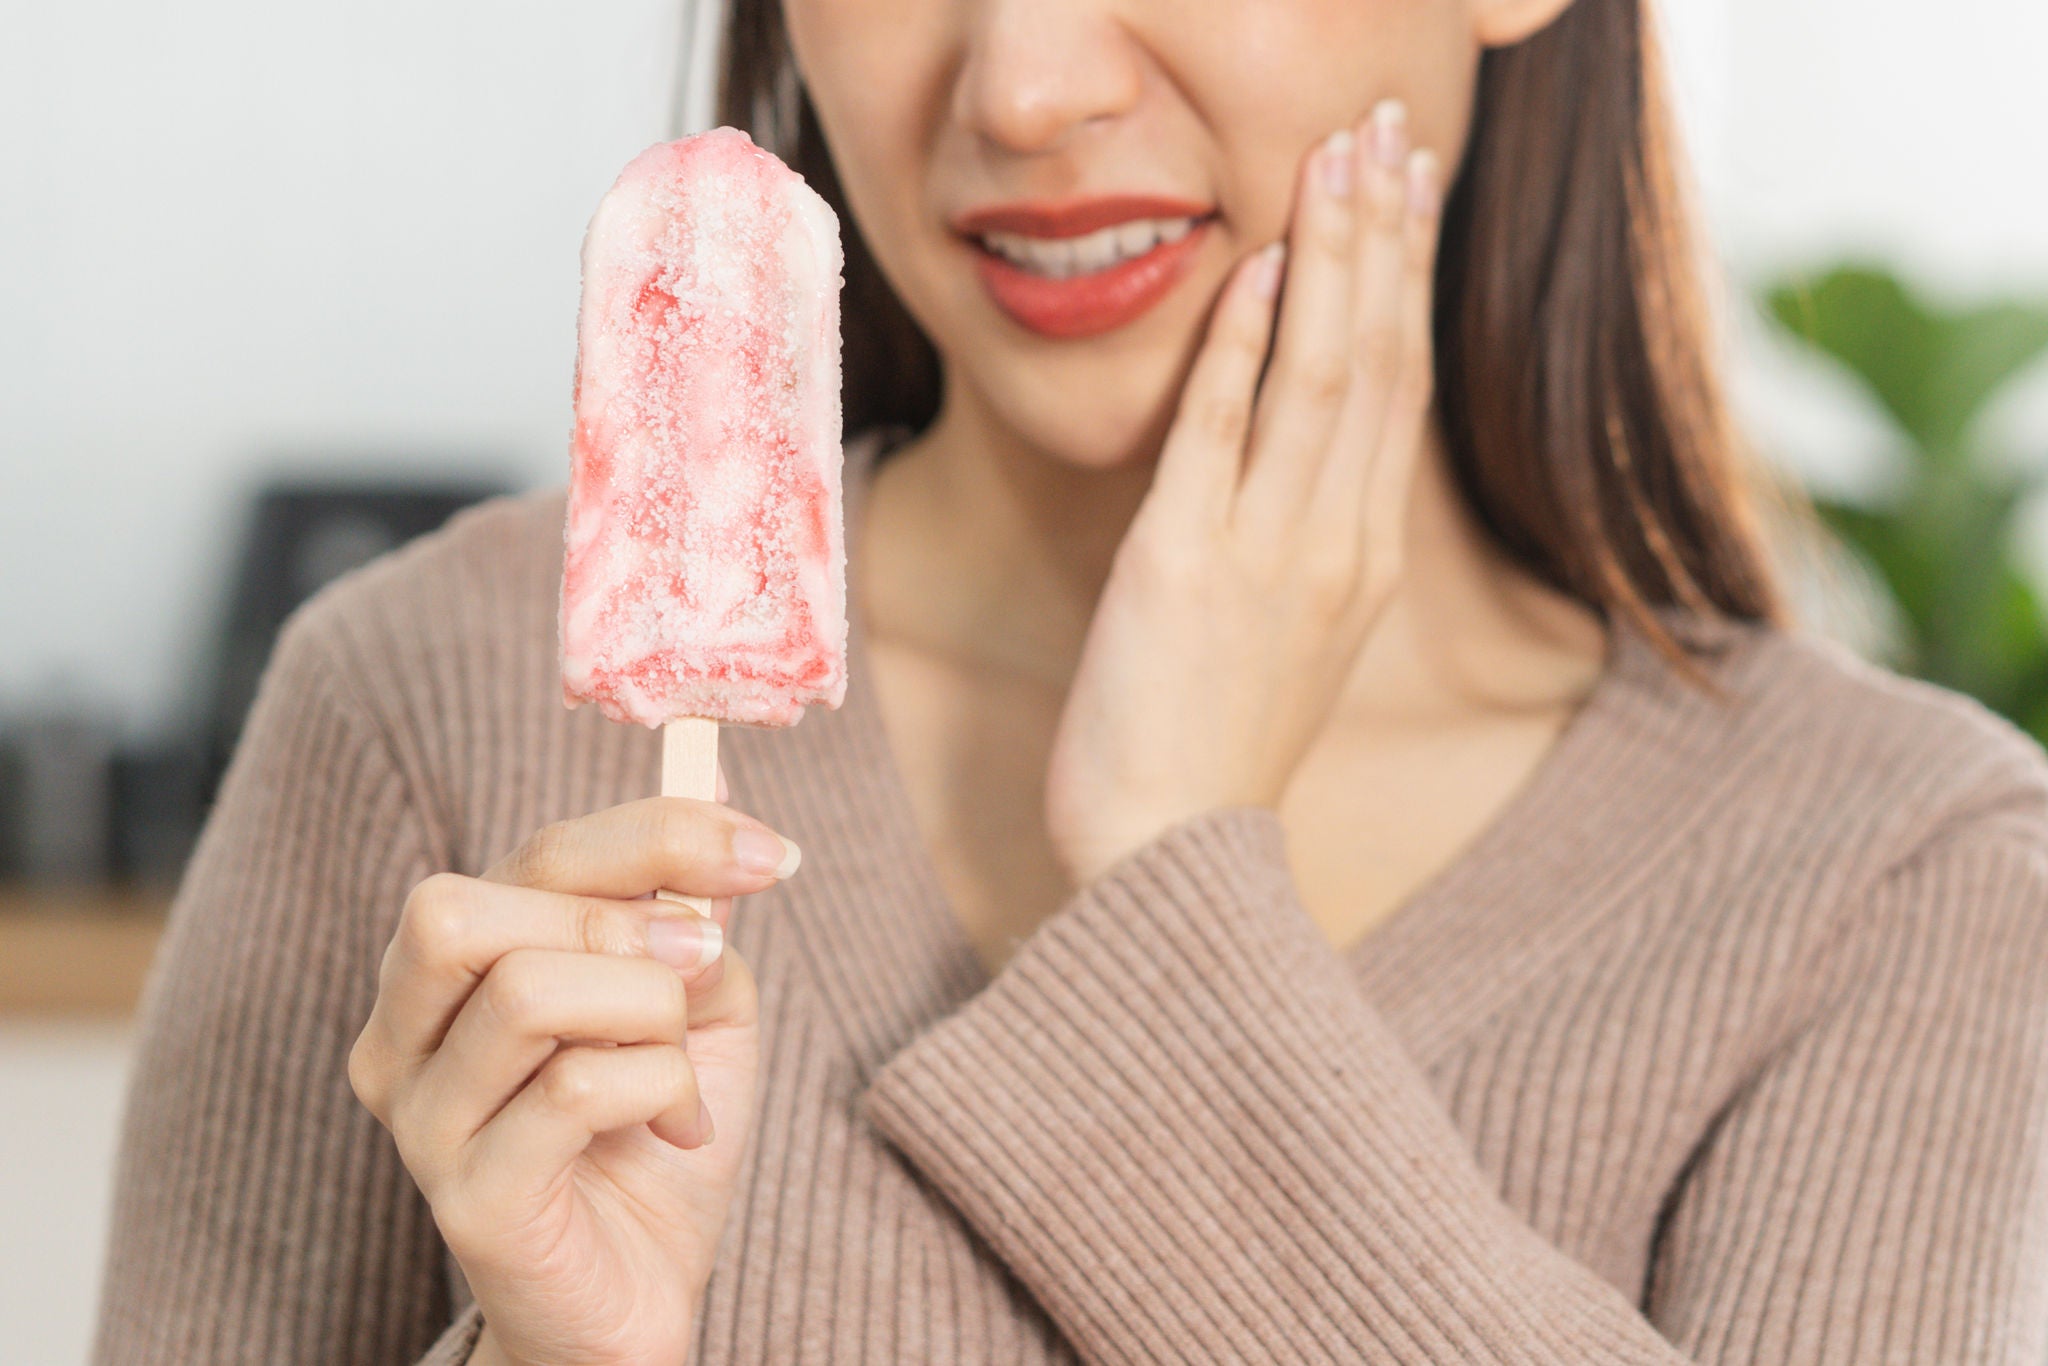 Face expression suffering from sensitive teeth and cold, asian young woman, girl hand holding,  eating ice cream, touching her cheek, feeling hurt, pain. Toothache molar tooth at home, dental problem.